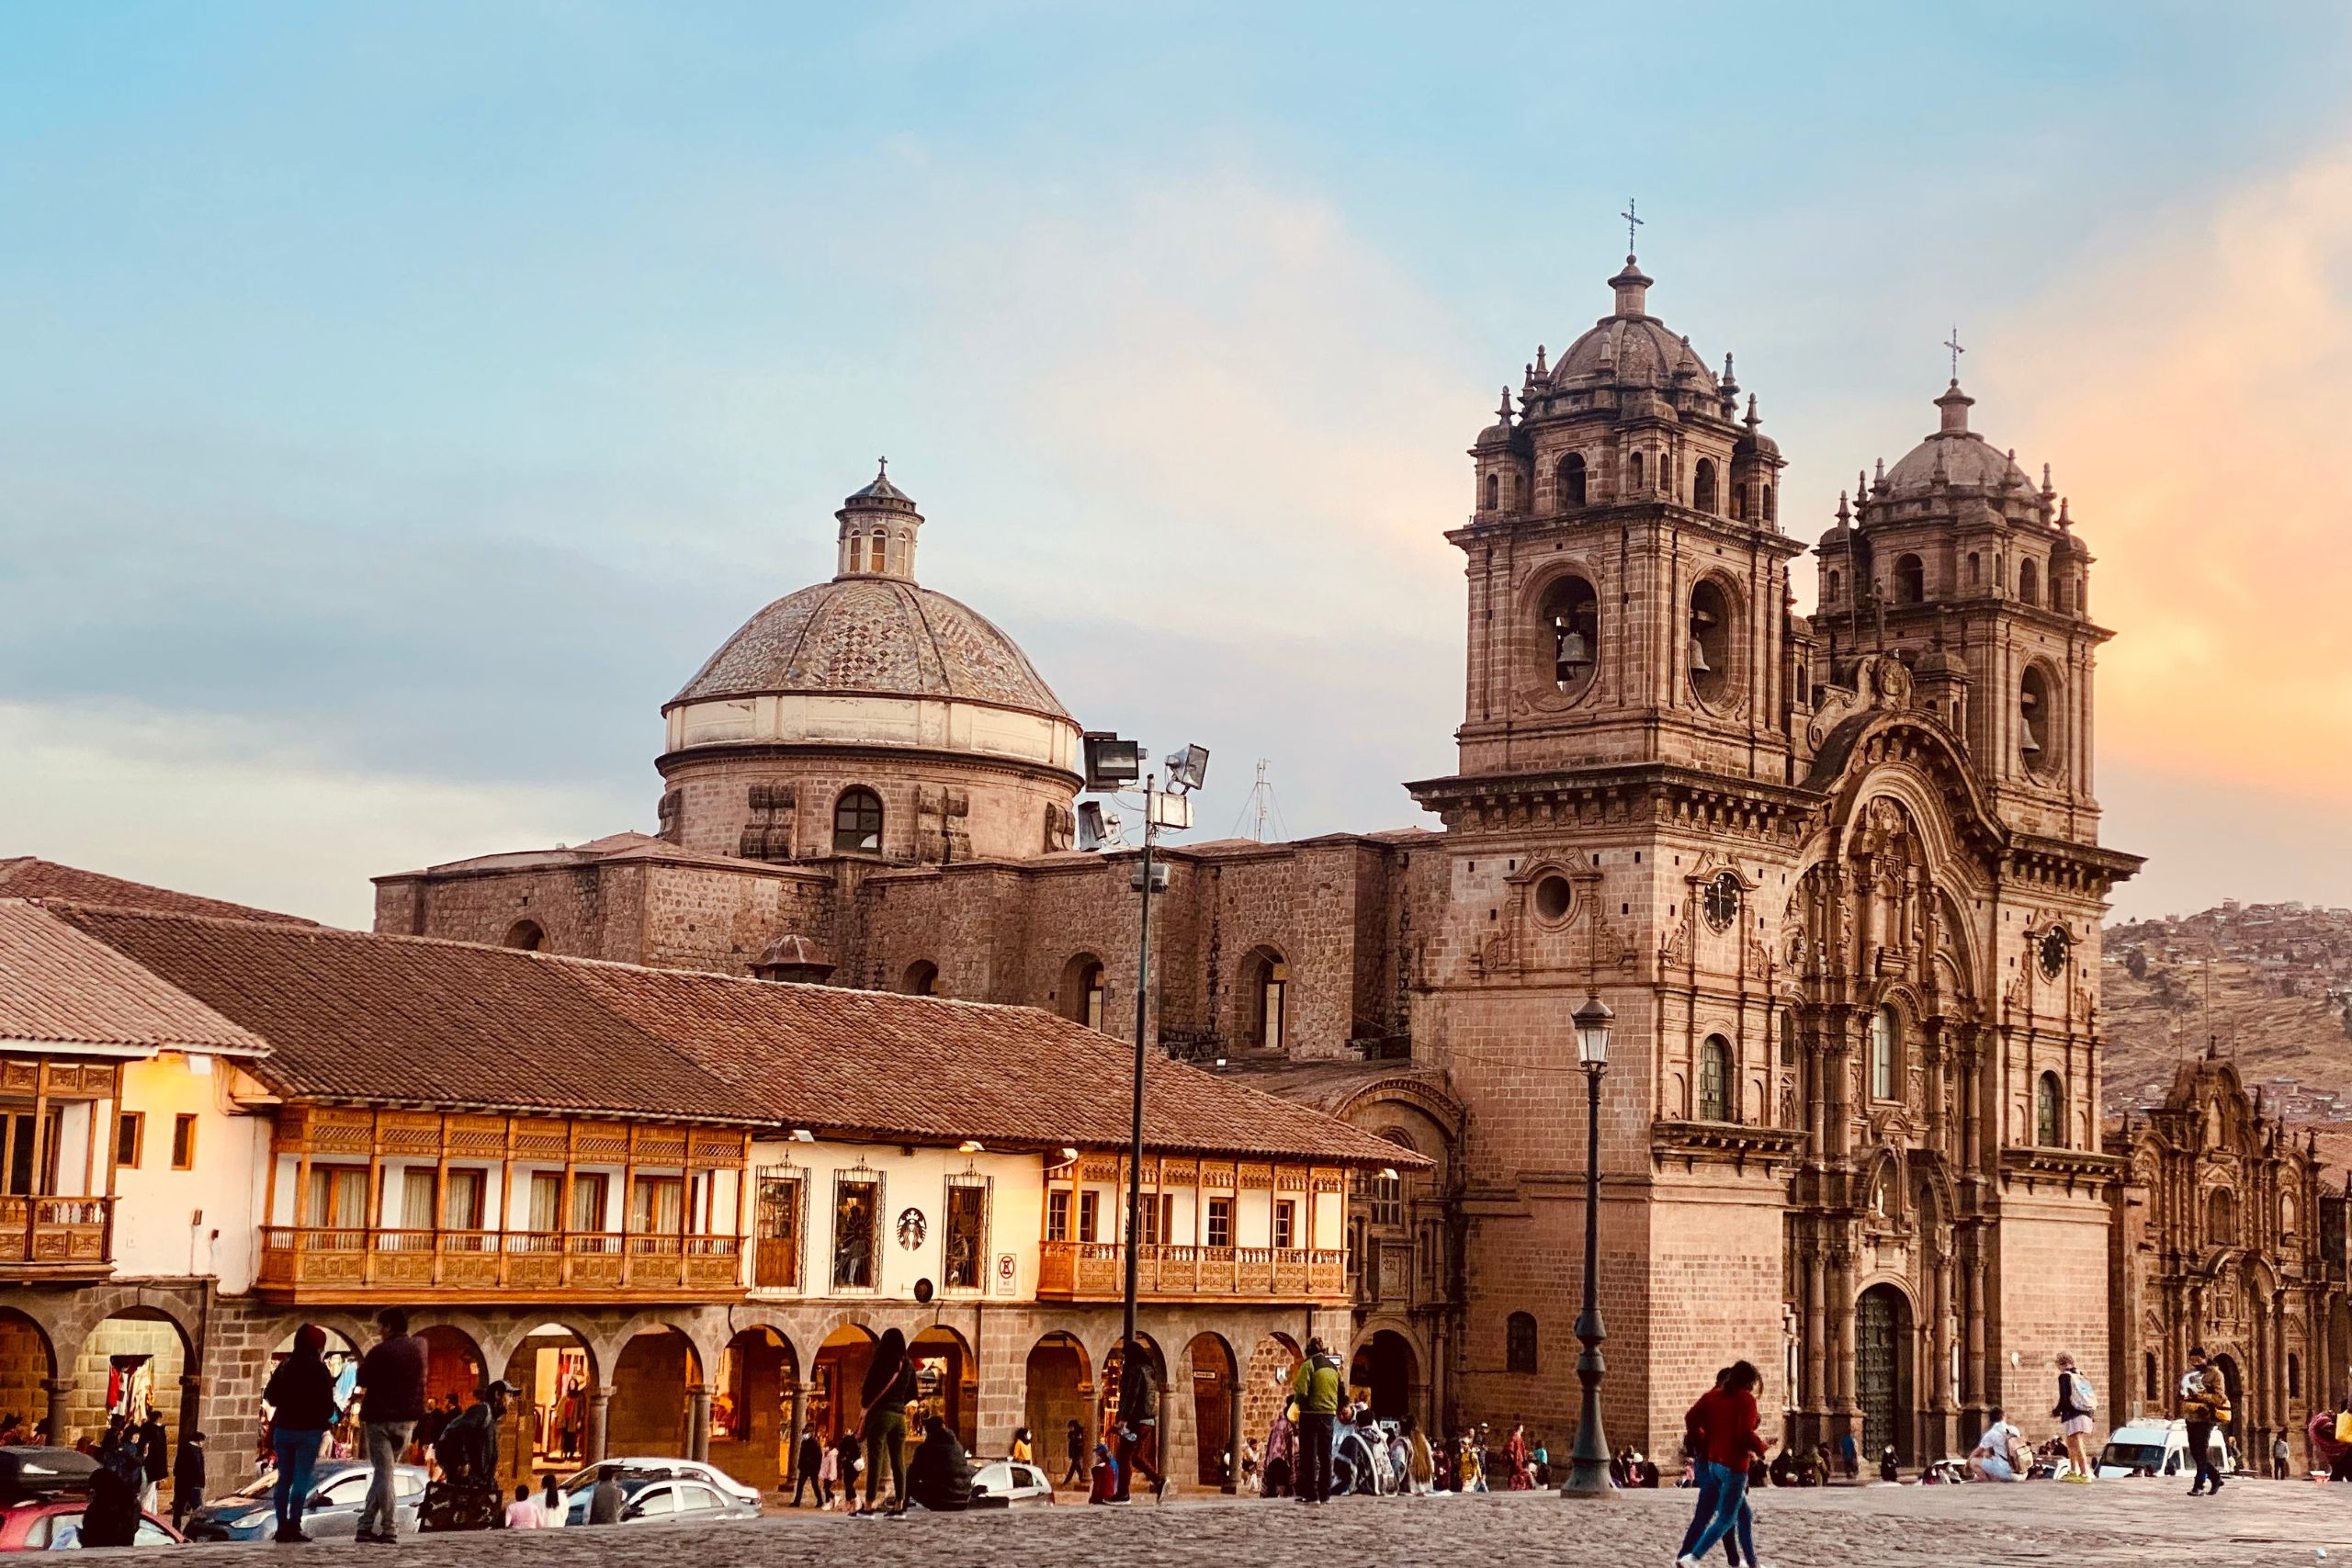 Bucket List Experiences: Exciting Things to do in Cusco